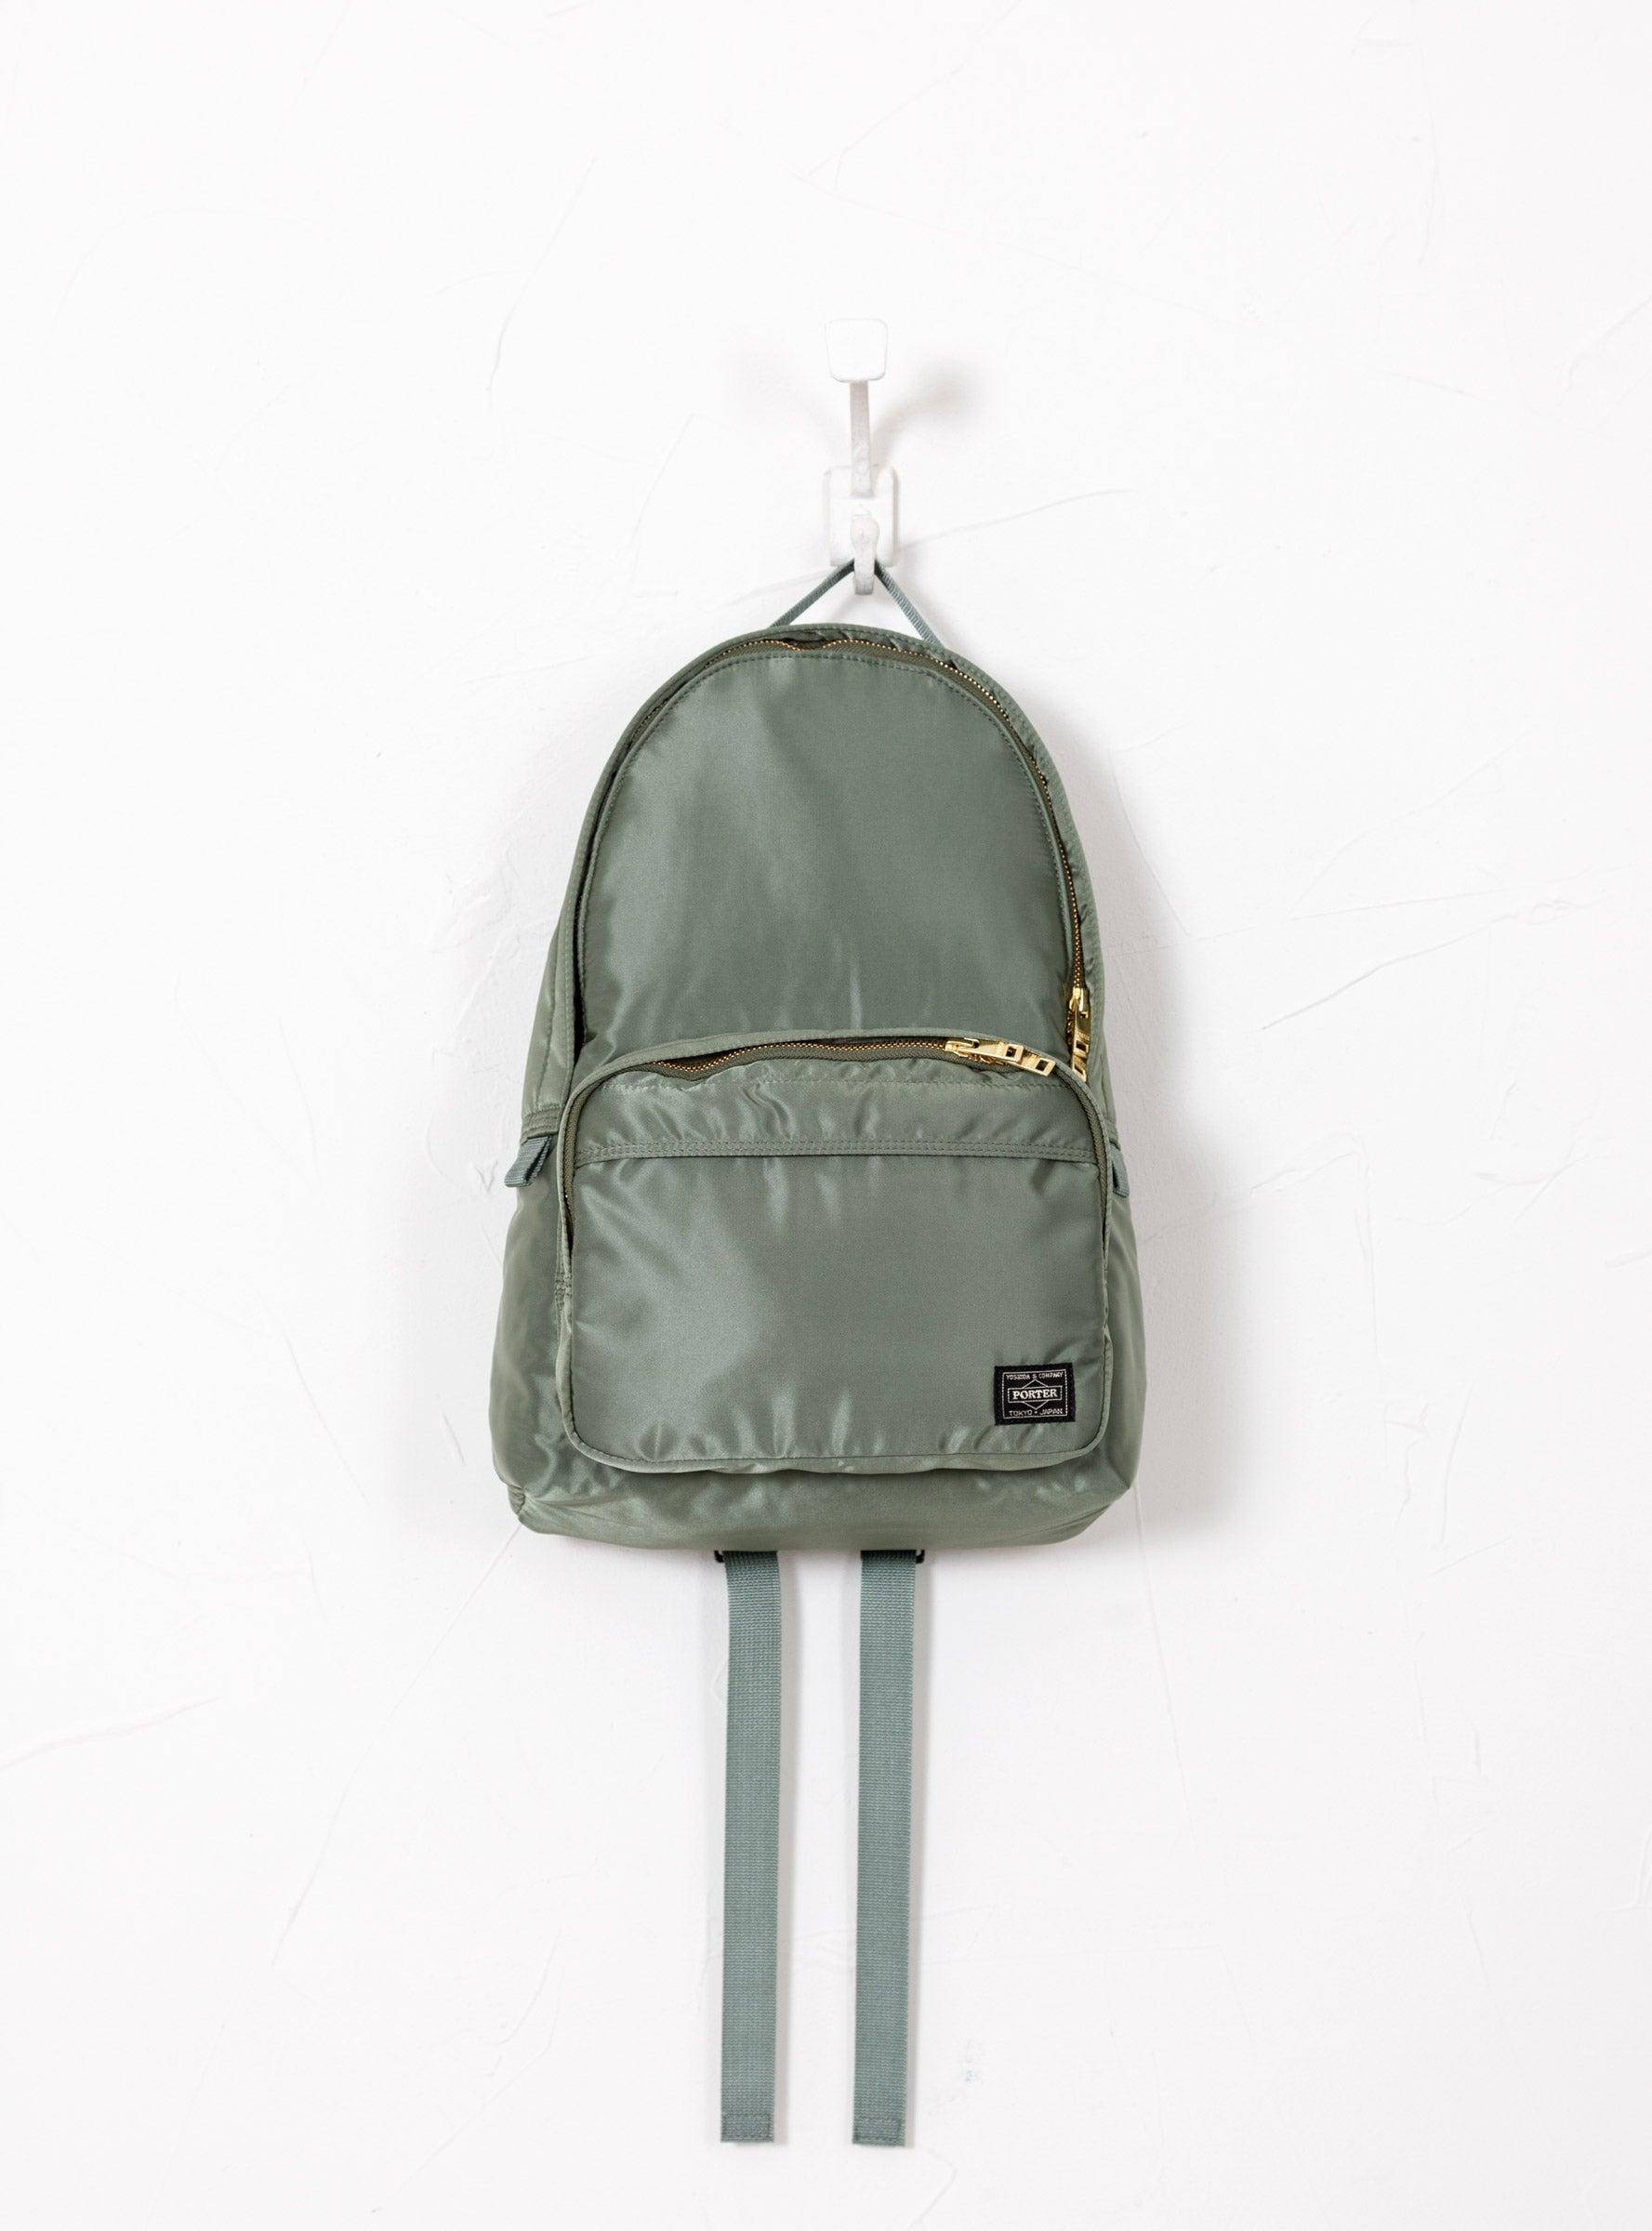 Porter-Yoshida and Co Tanker Day Pack Medium Sage Green for 